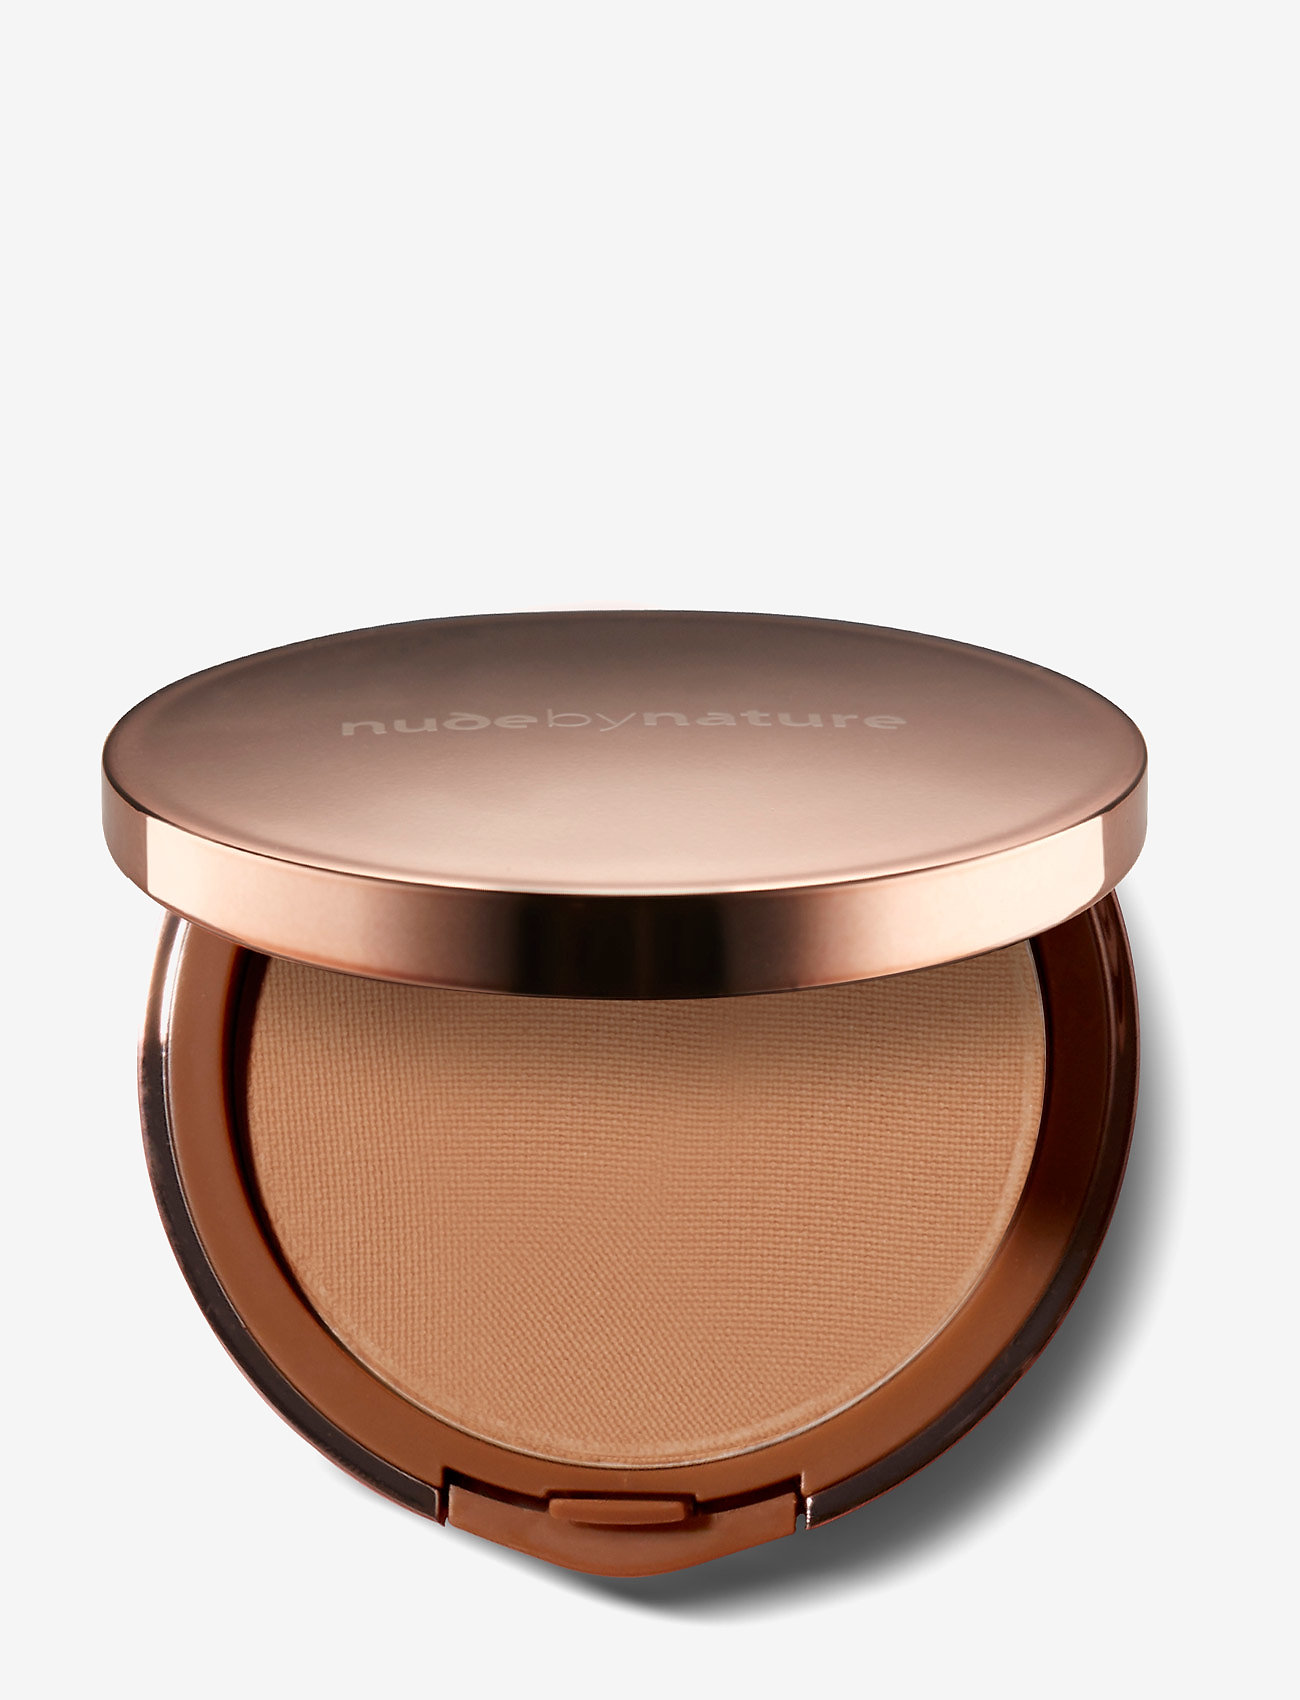 Nude by Nature Flawless Powder Foundation (N5 Champagne) - 4.623,20 kr Boozt.com